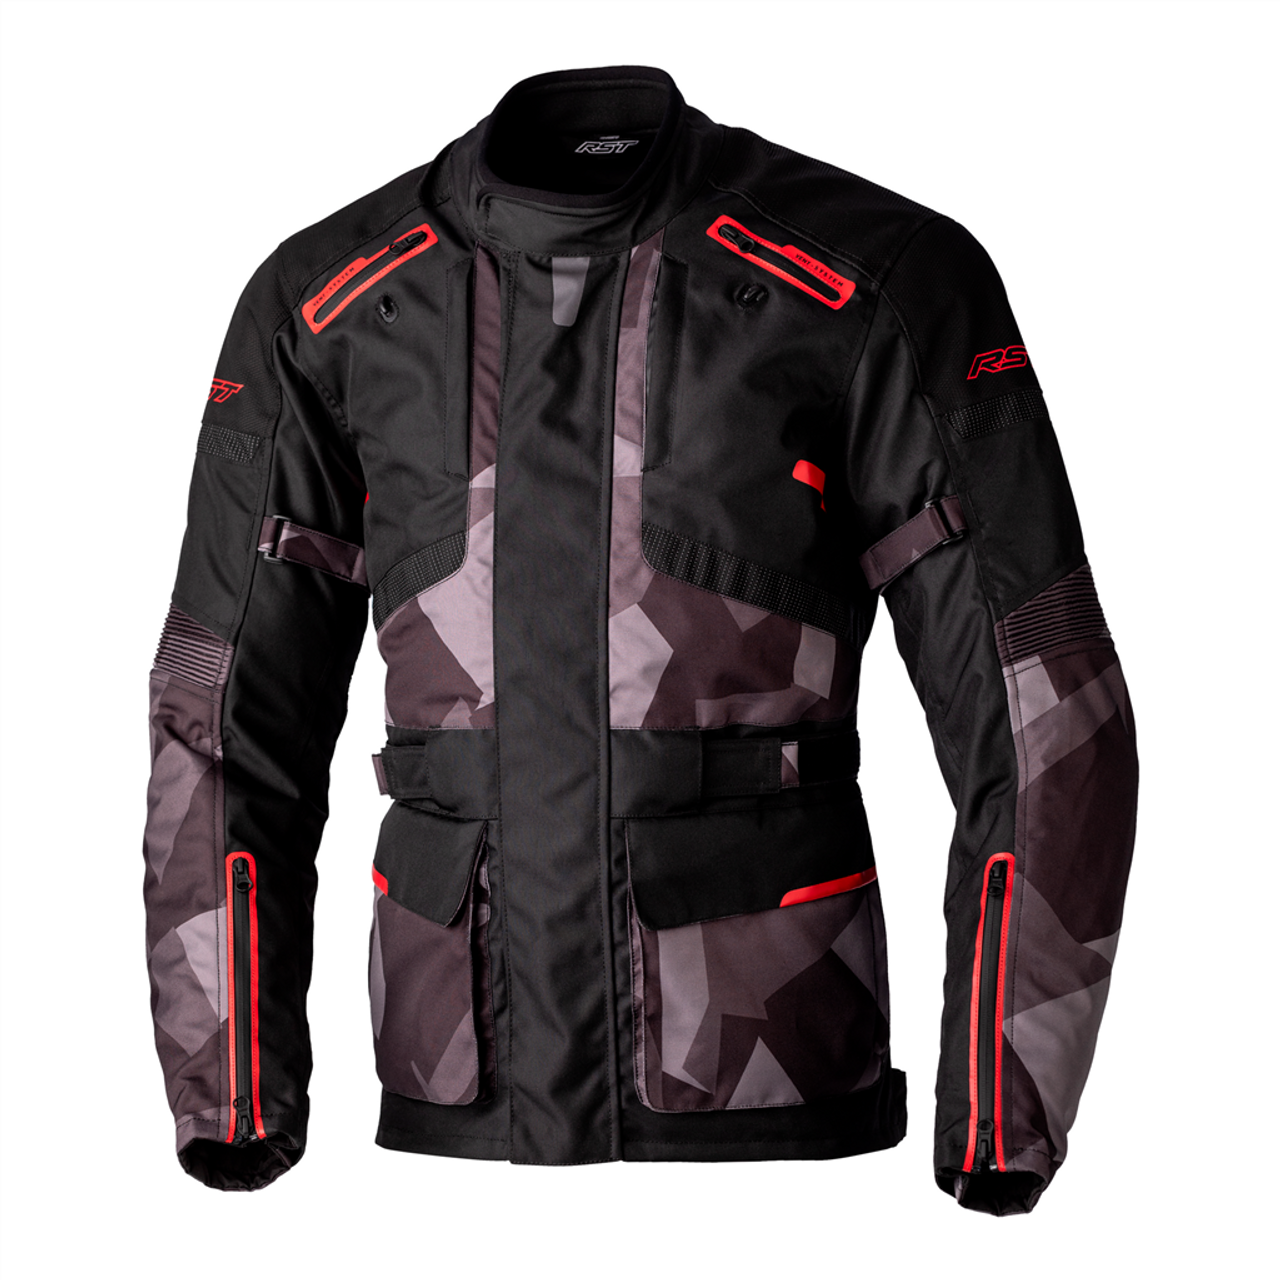 RST Endurance CE Motorcycle Waterproof Jacket Camo Red